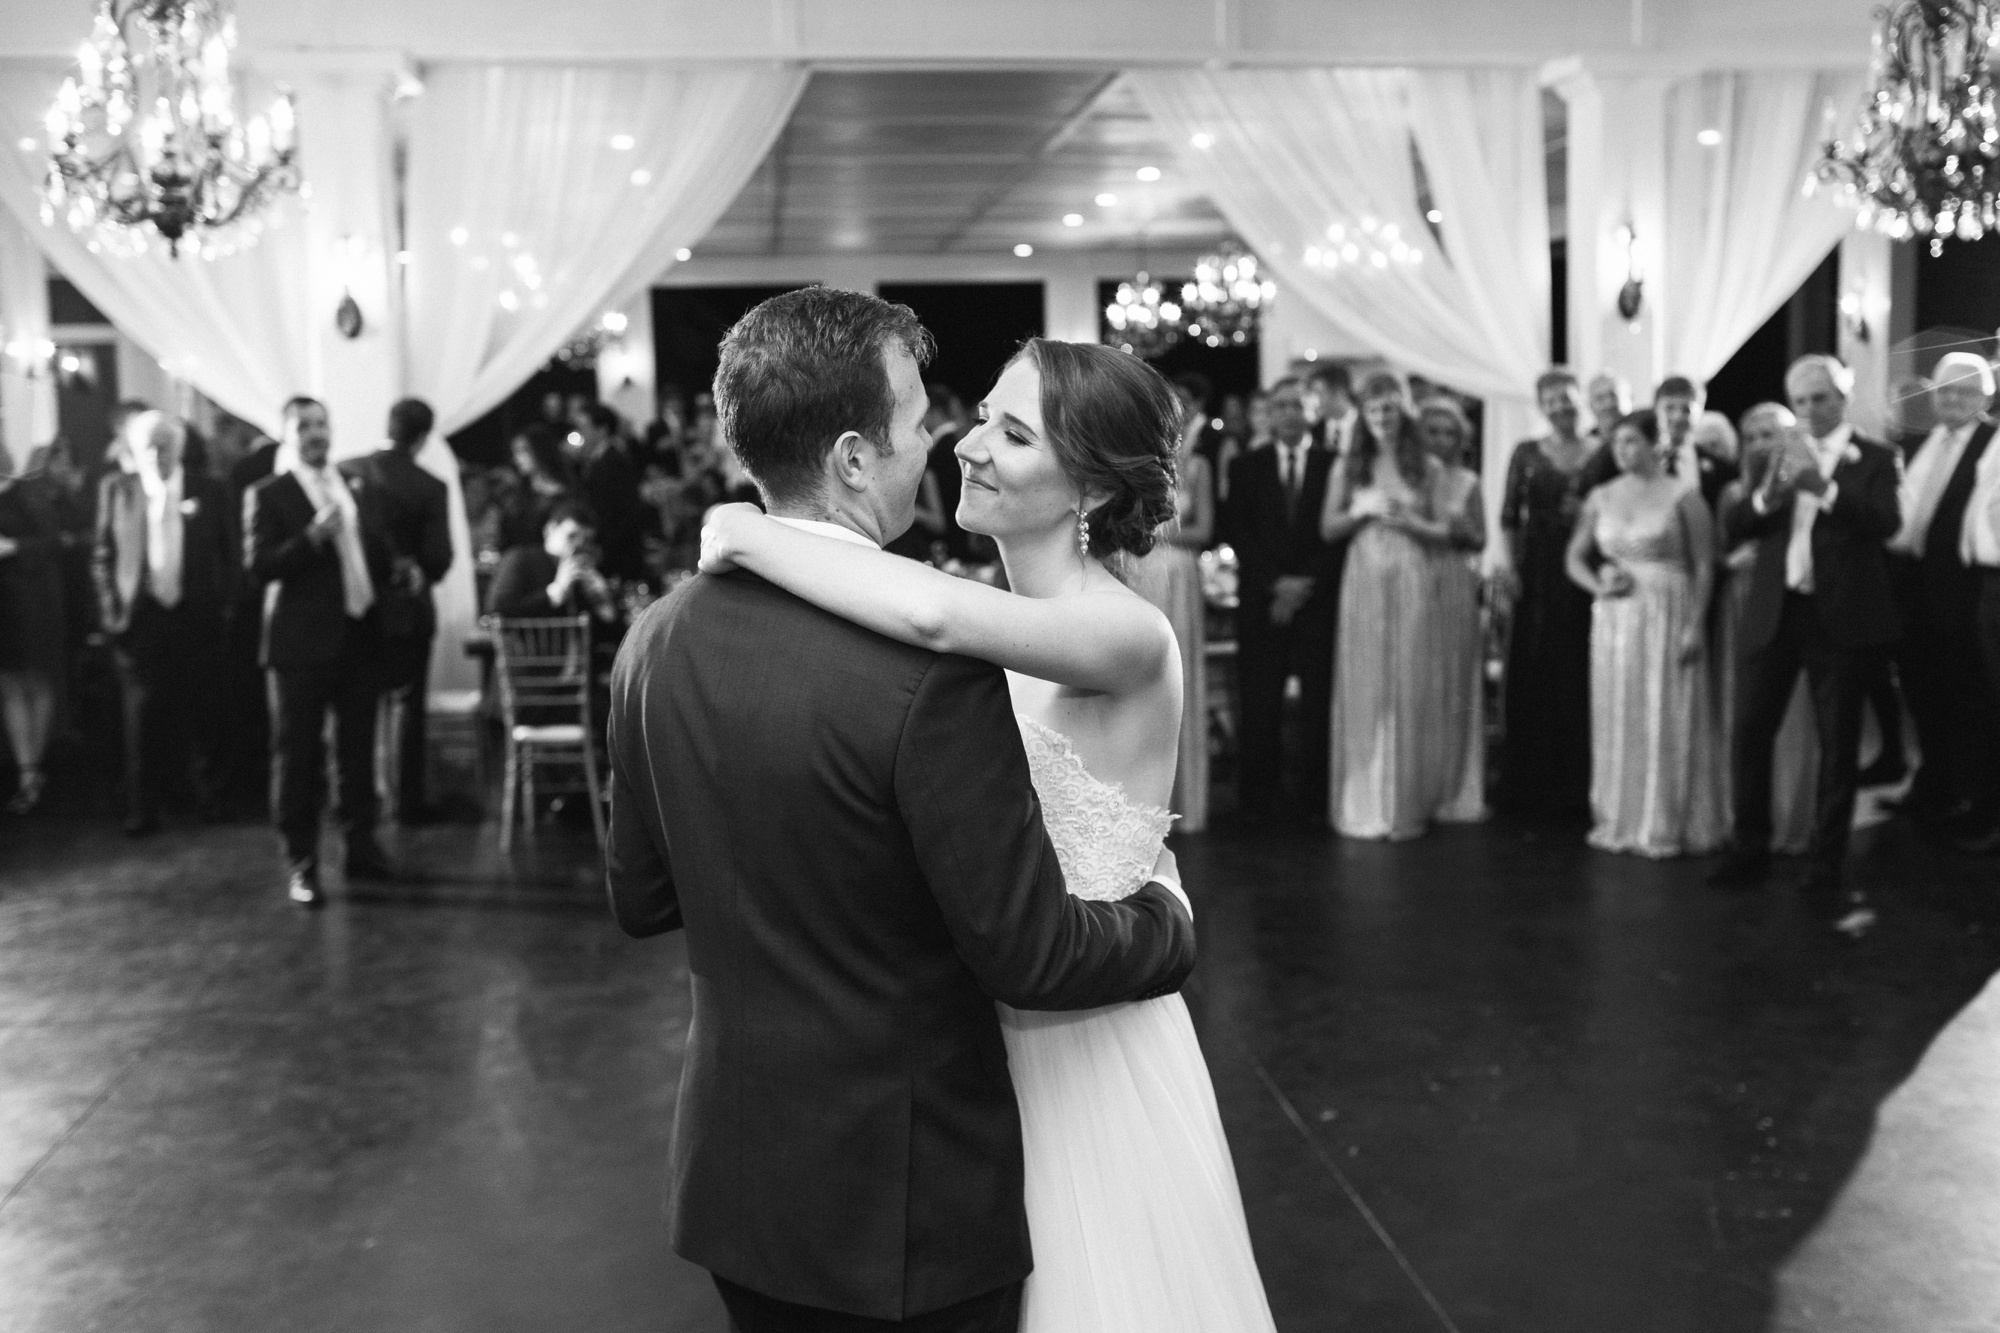 First dances are completely magical, completely emotional, completely wonderful.